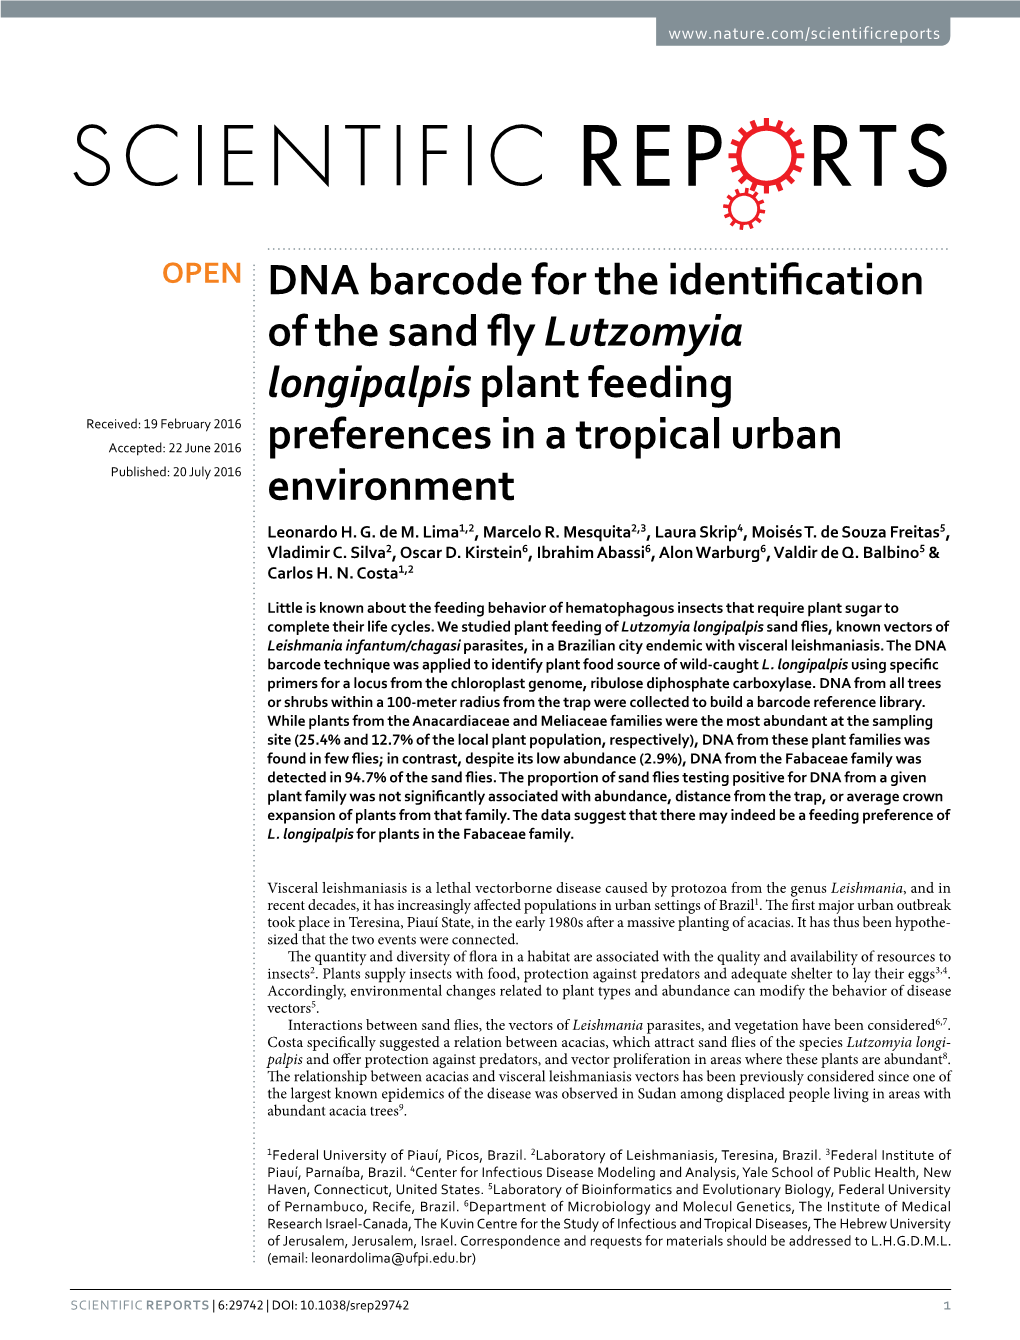 DNA Barcode for the Identification of the Sand Fly Lutzomyia Longipalpis Plant Feeding Preferences in a Tropical Urban Environment